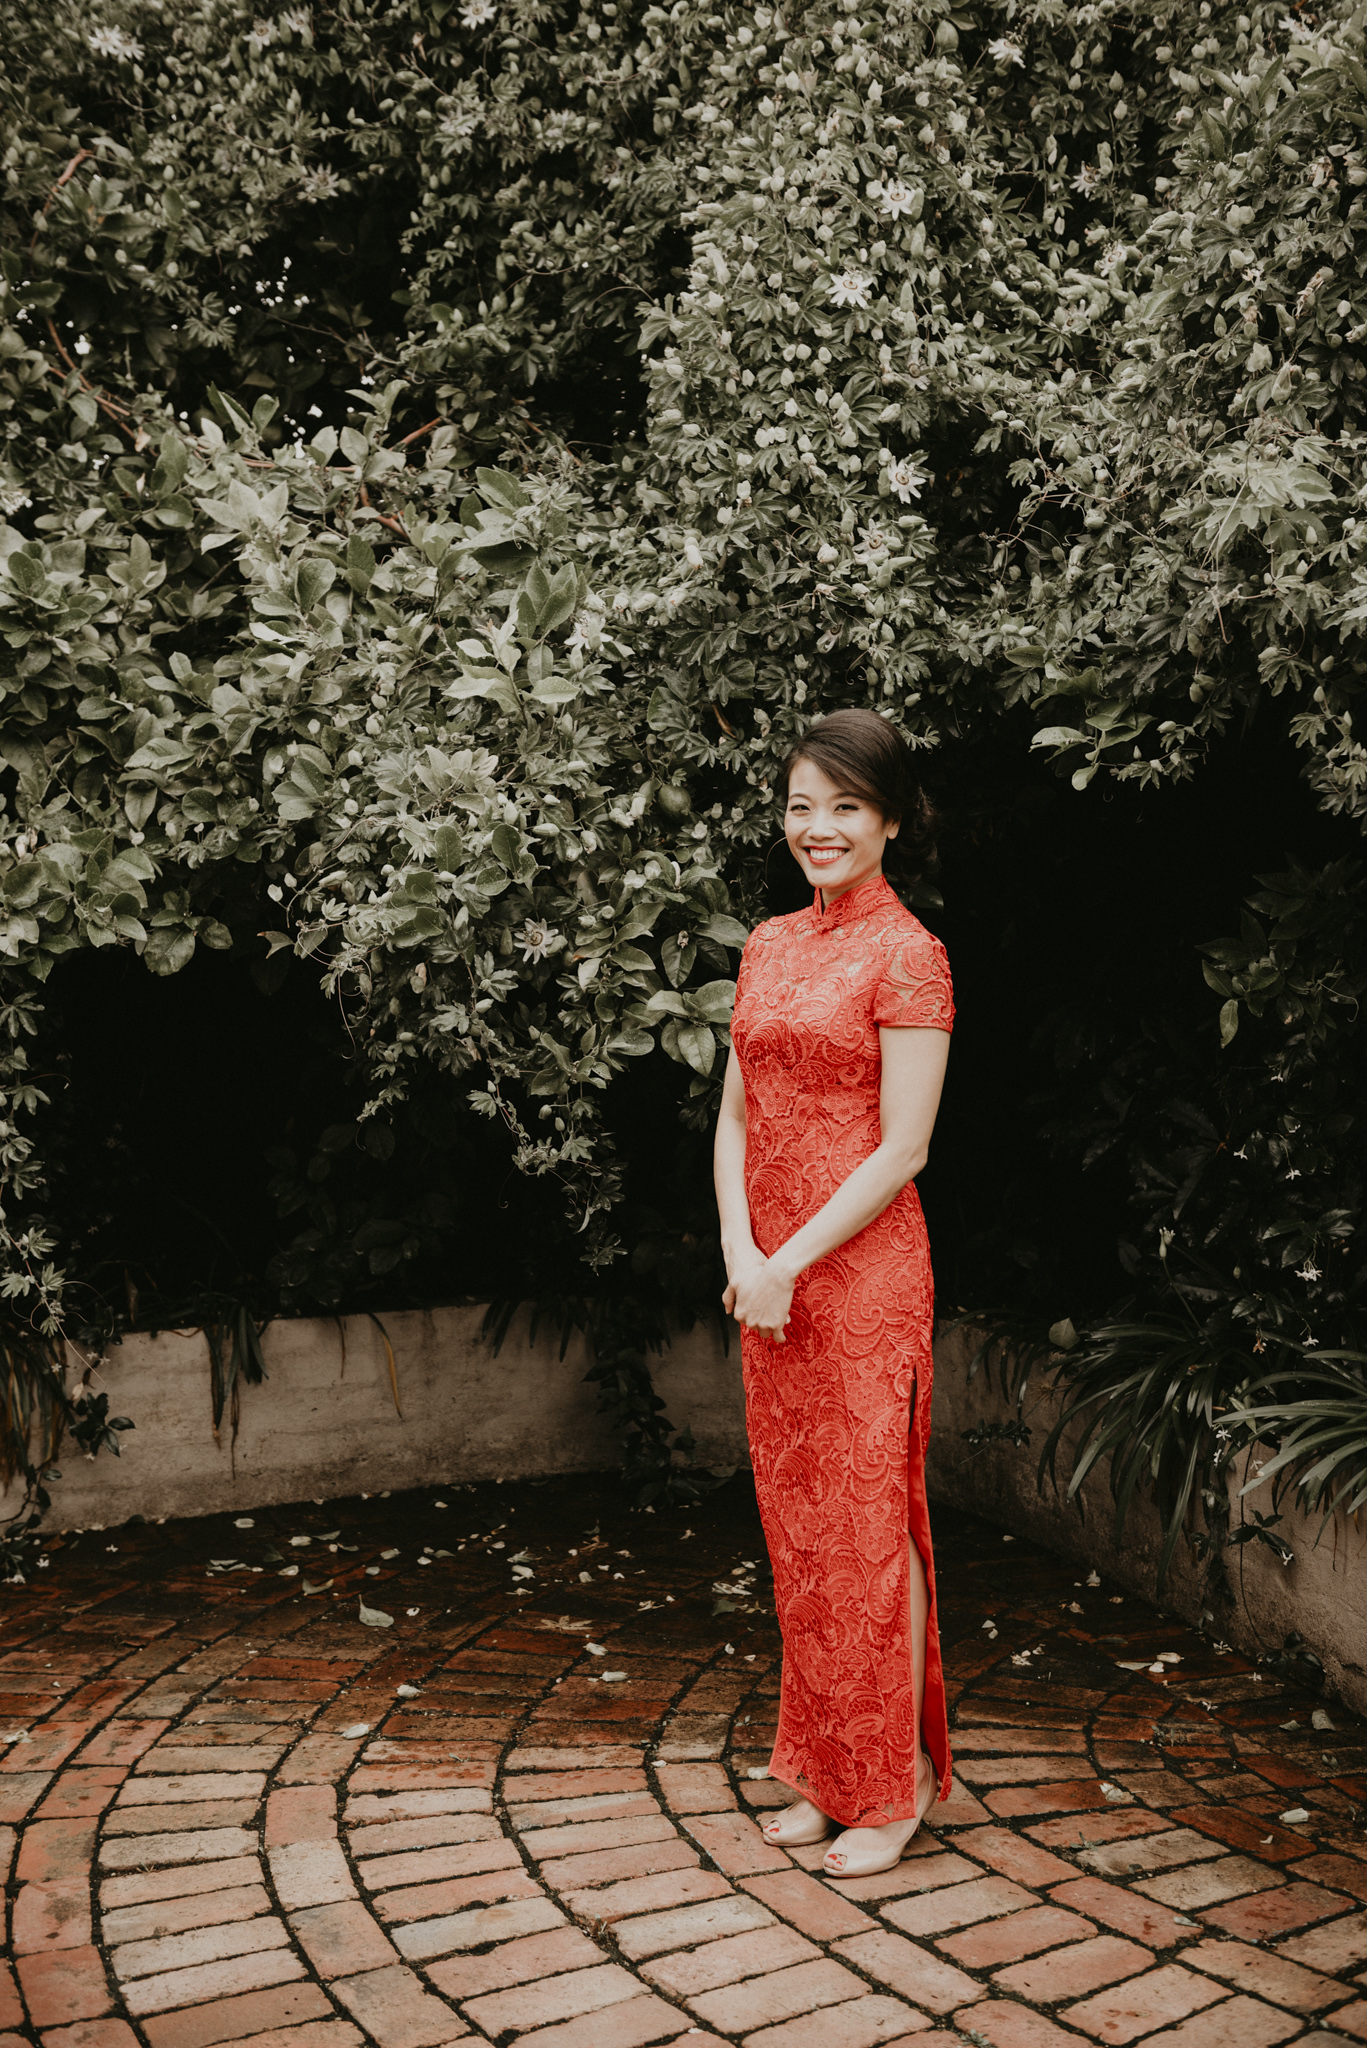 agnes-duy-15th-december-2018-chinese-vietnamese-wedding-tea-ceremony-yarraville-home-house-documentary-candid-photographer-sarah-matler-photography-4